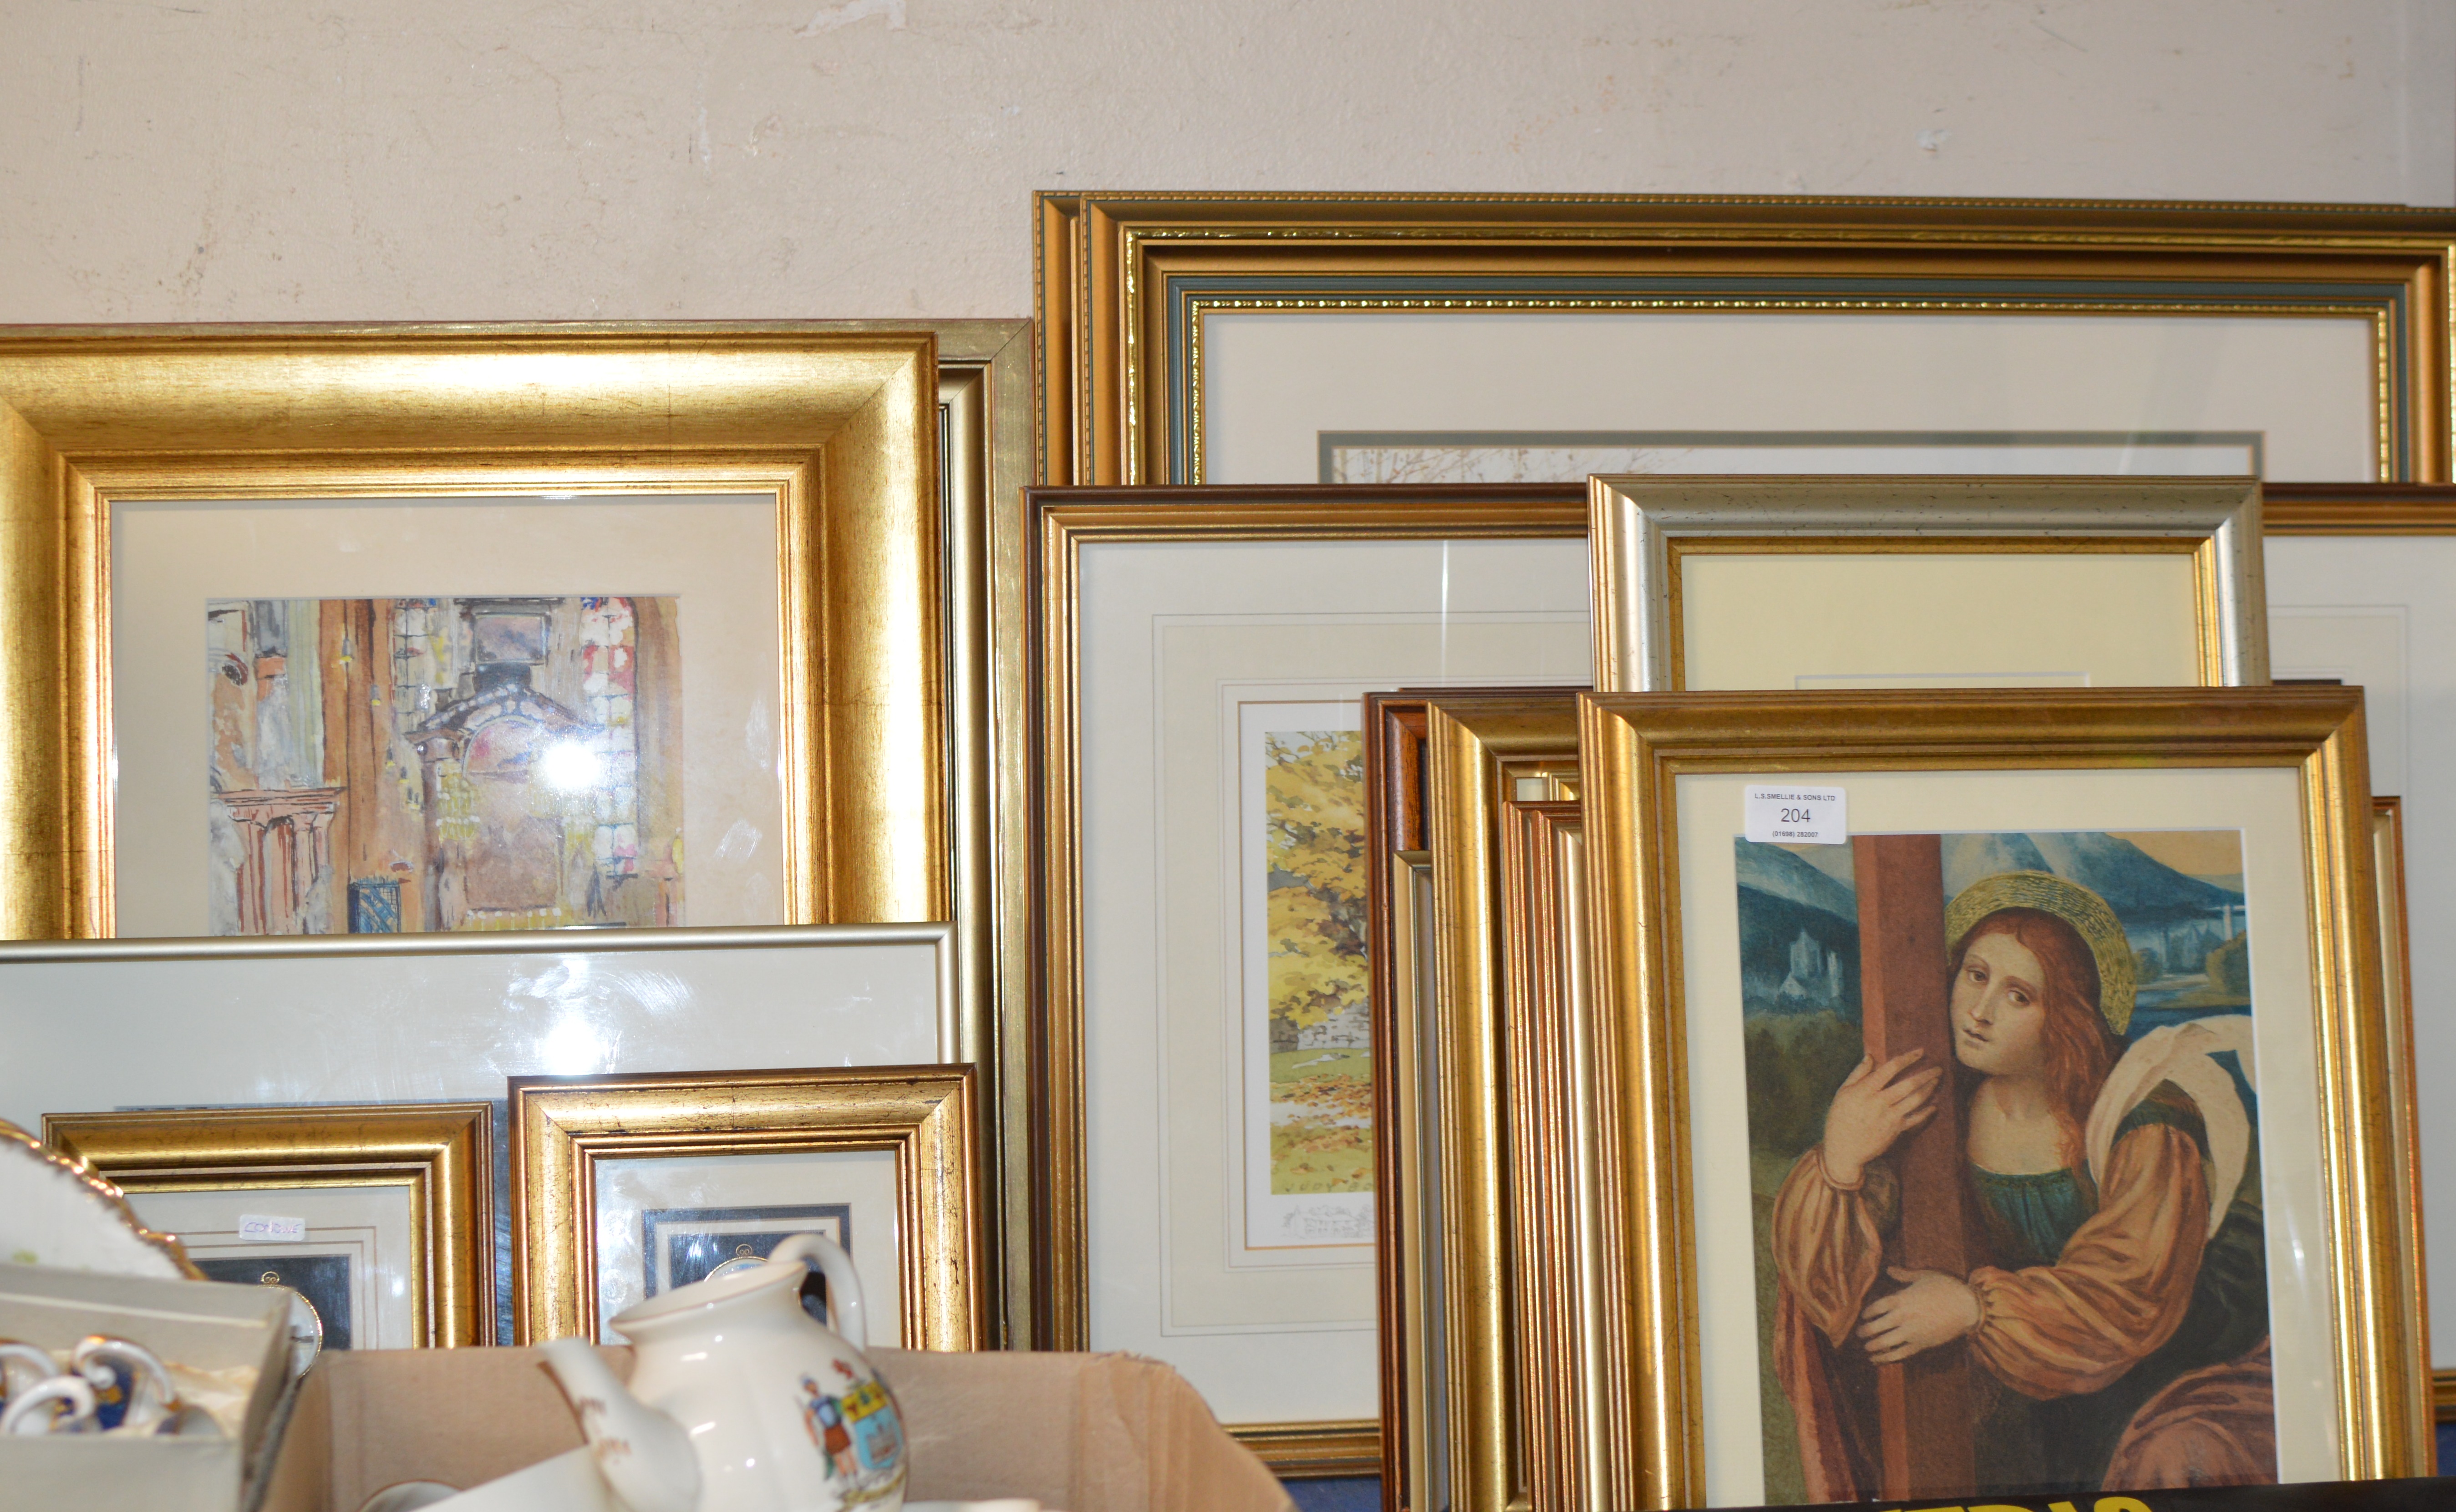 VARIOUS FRAMED PICTURES